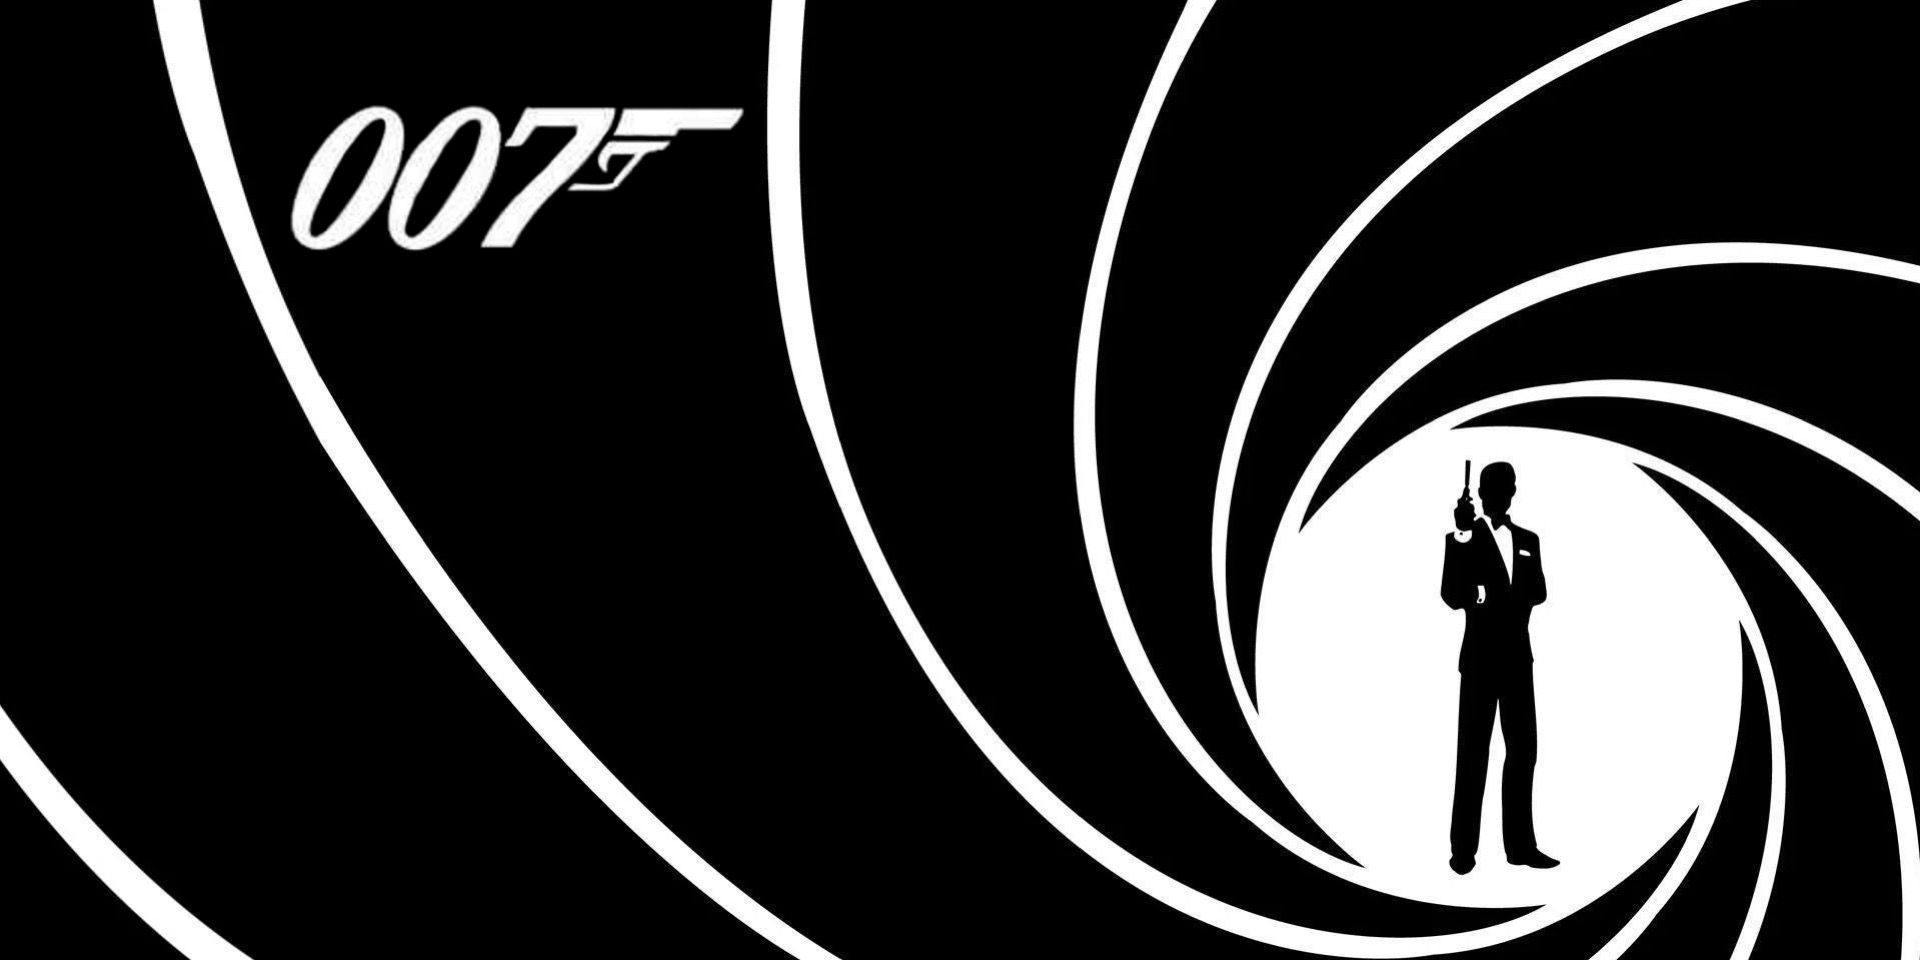 Lone figure in the black spiral of James Bond's title card